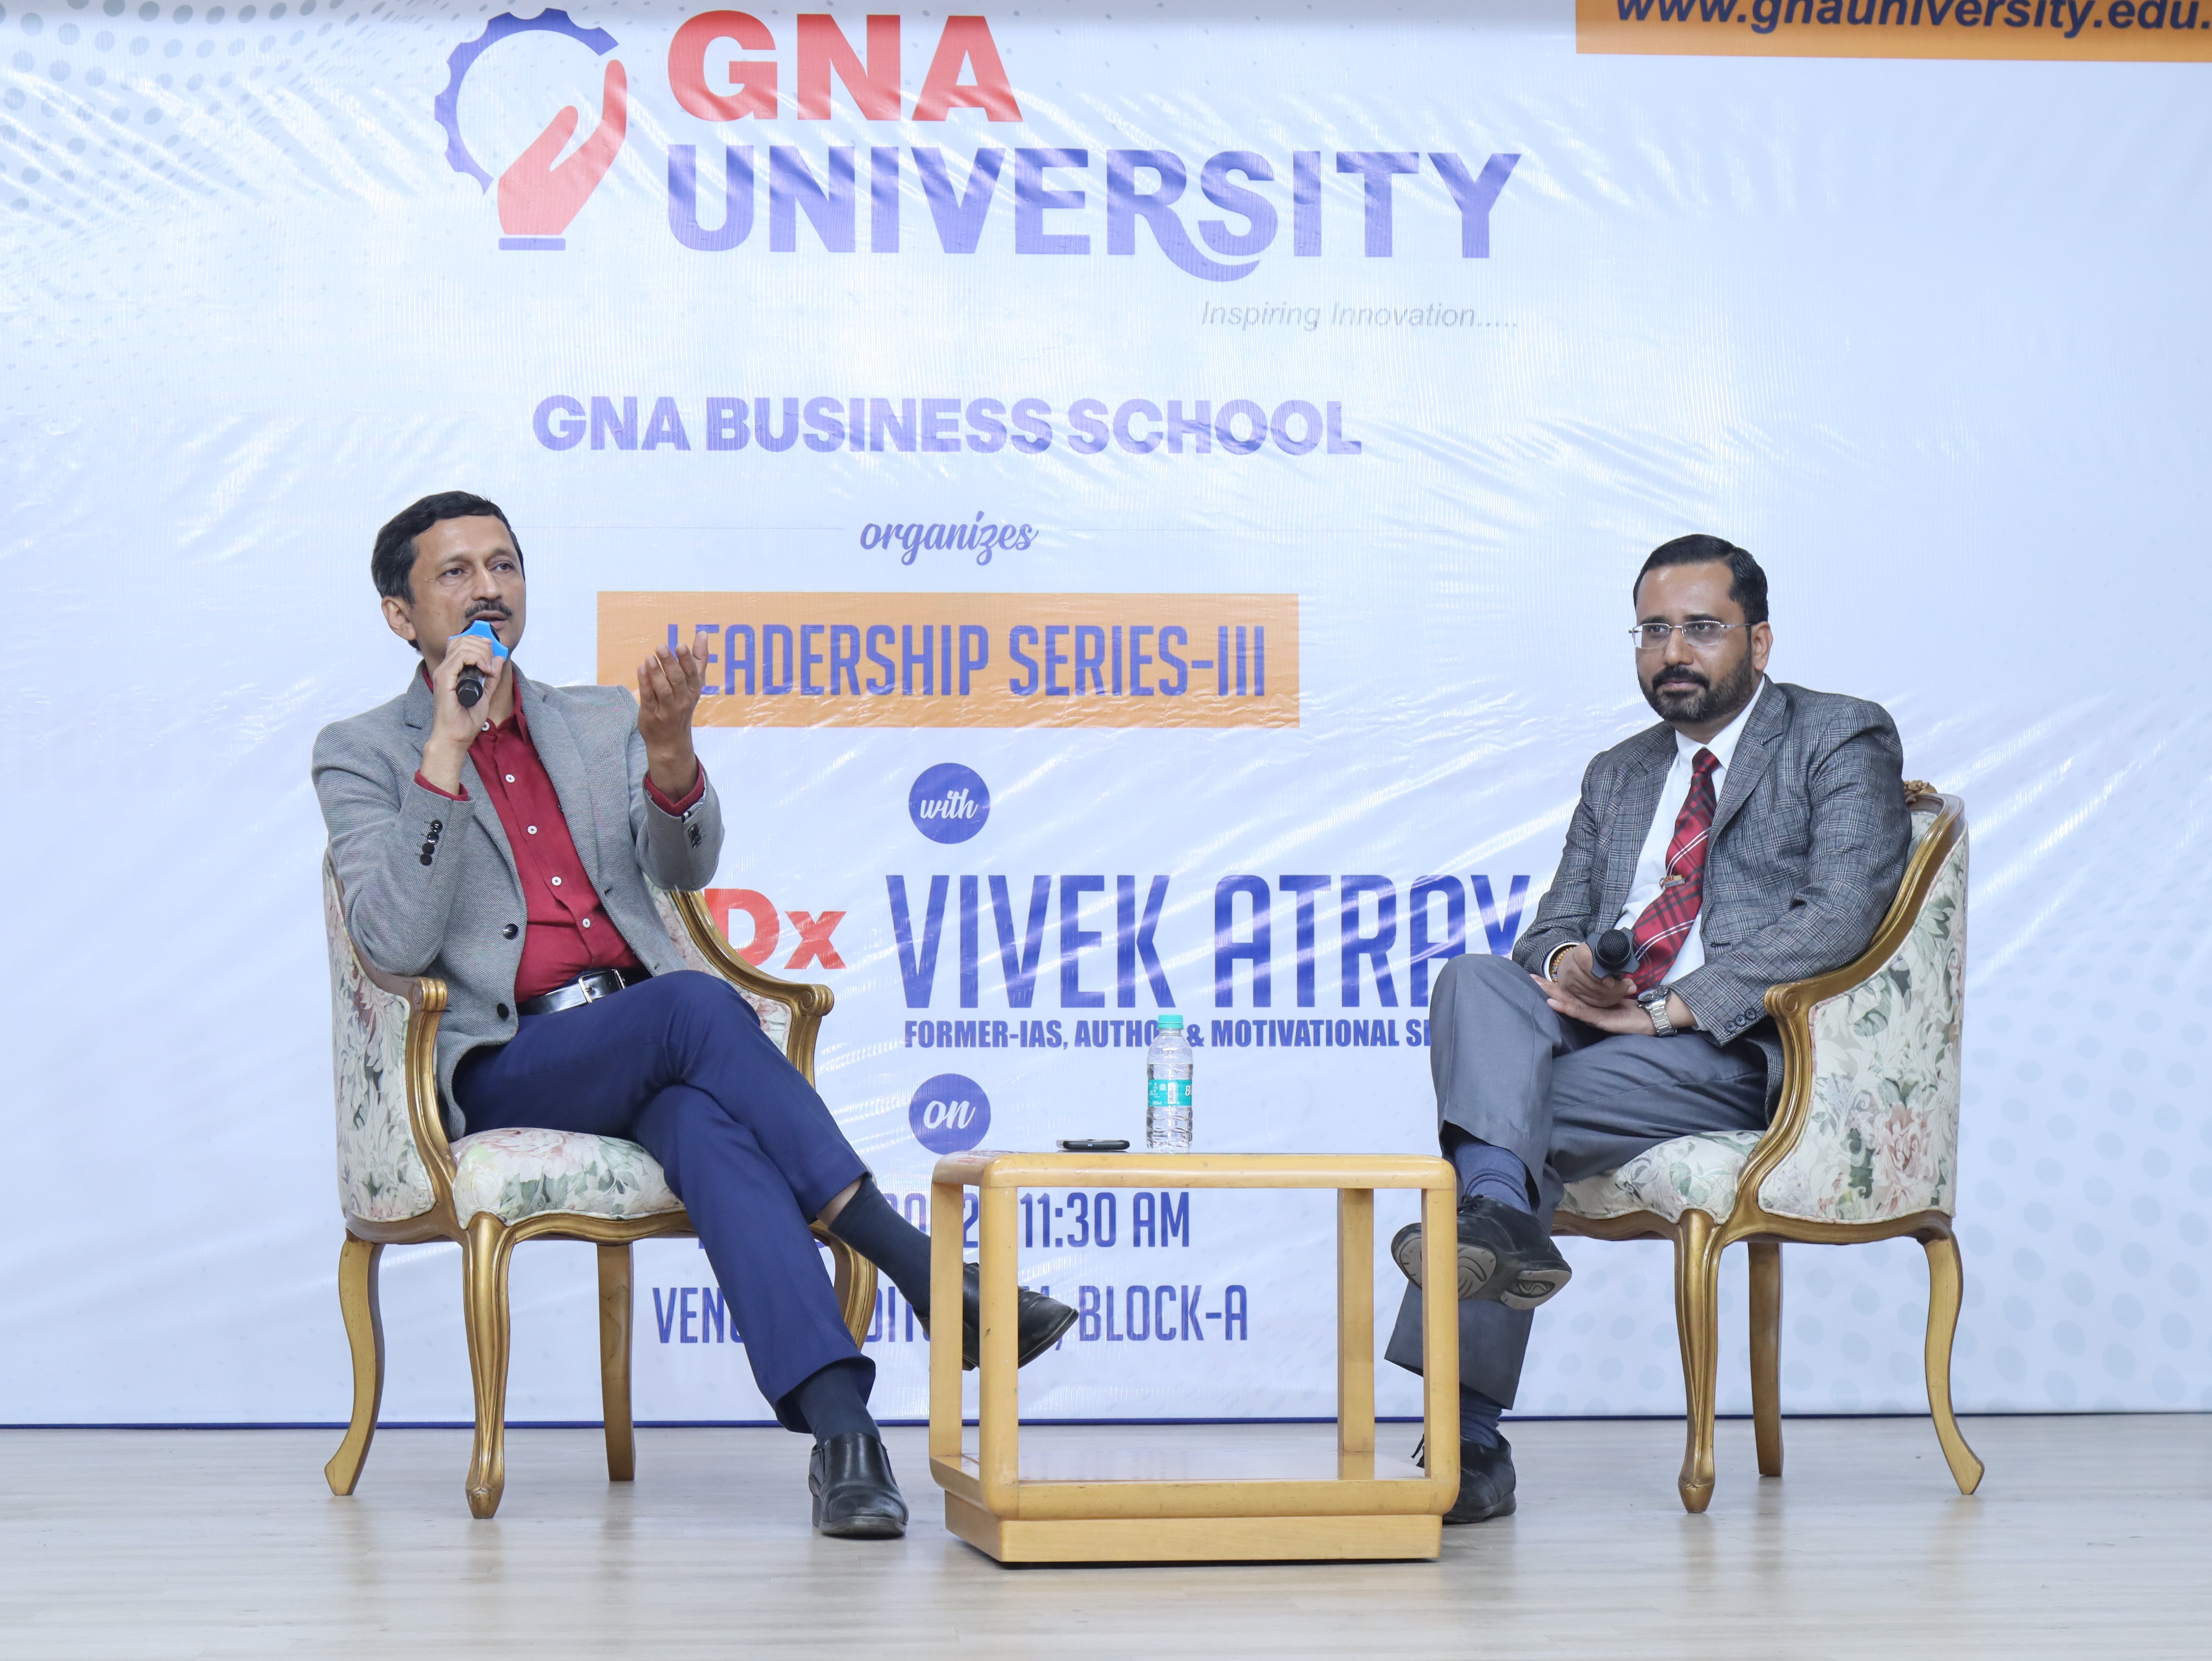 “The on-going Journey of a Visionary” @ GNA University